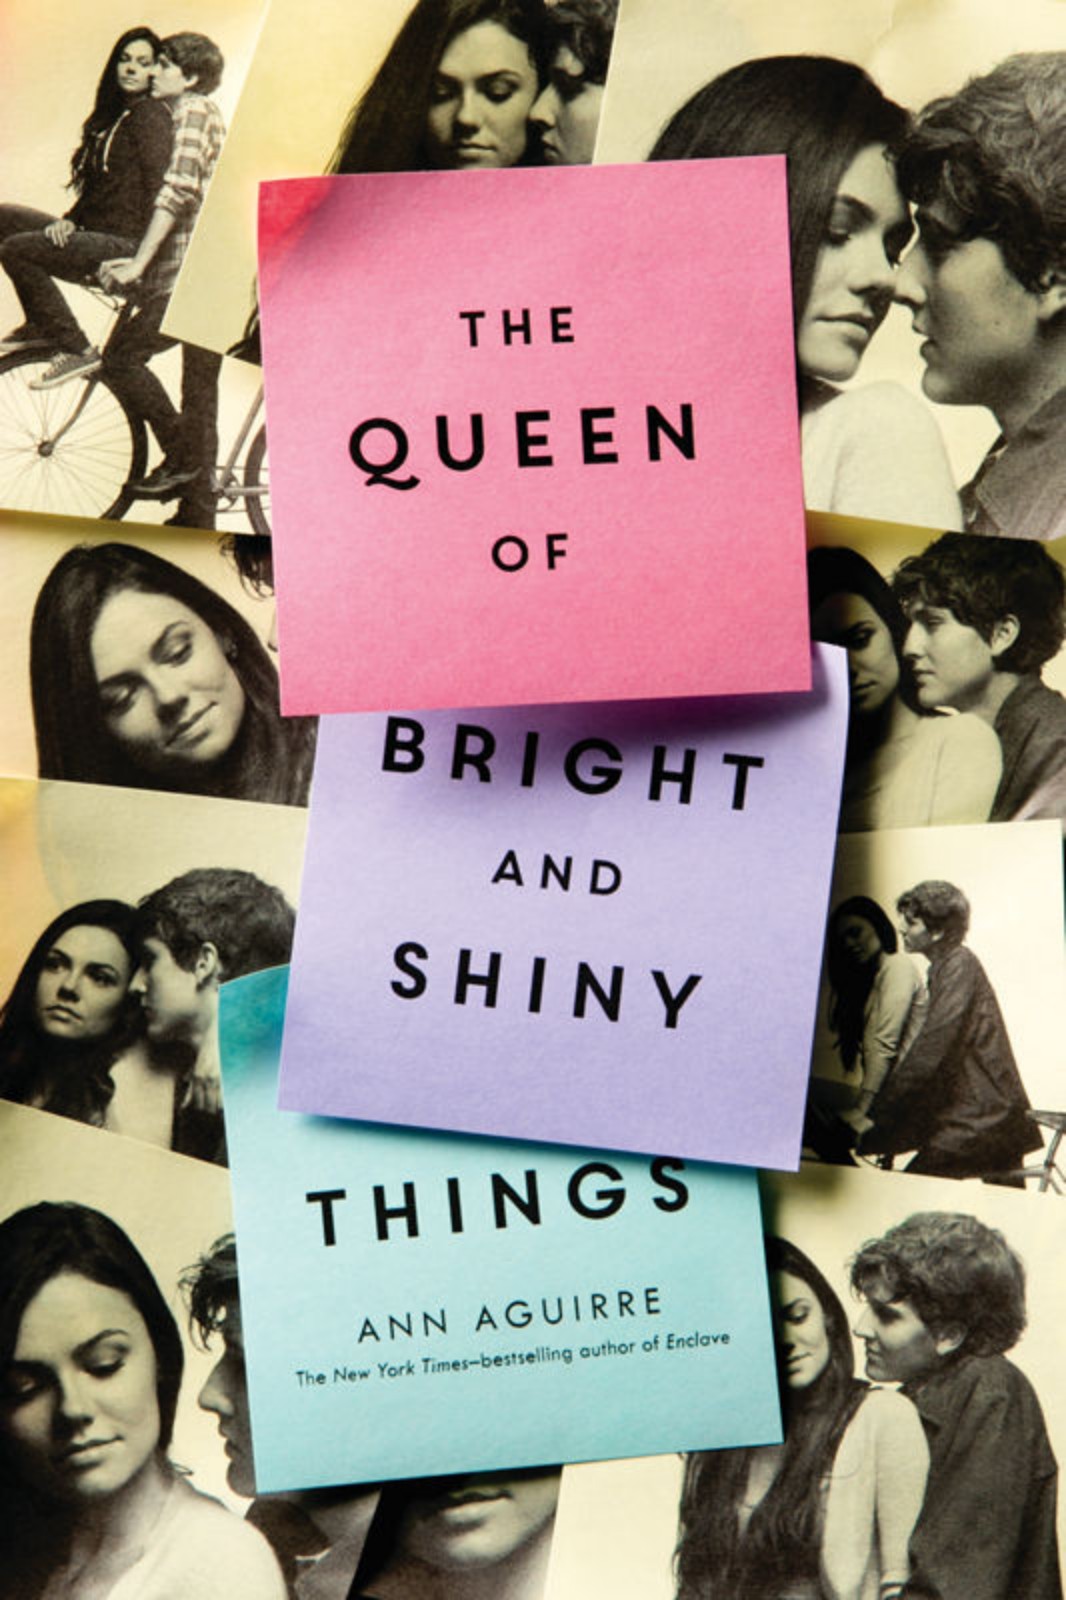 The Queen of Bright and Shiny Things by Ann Aguirre